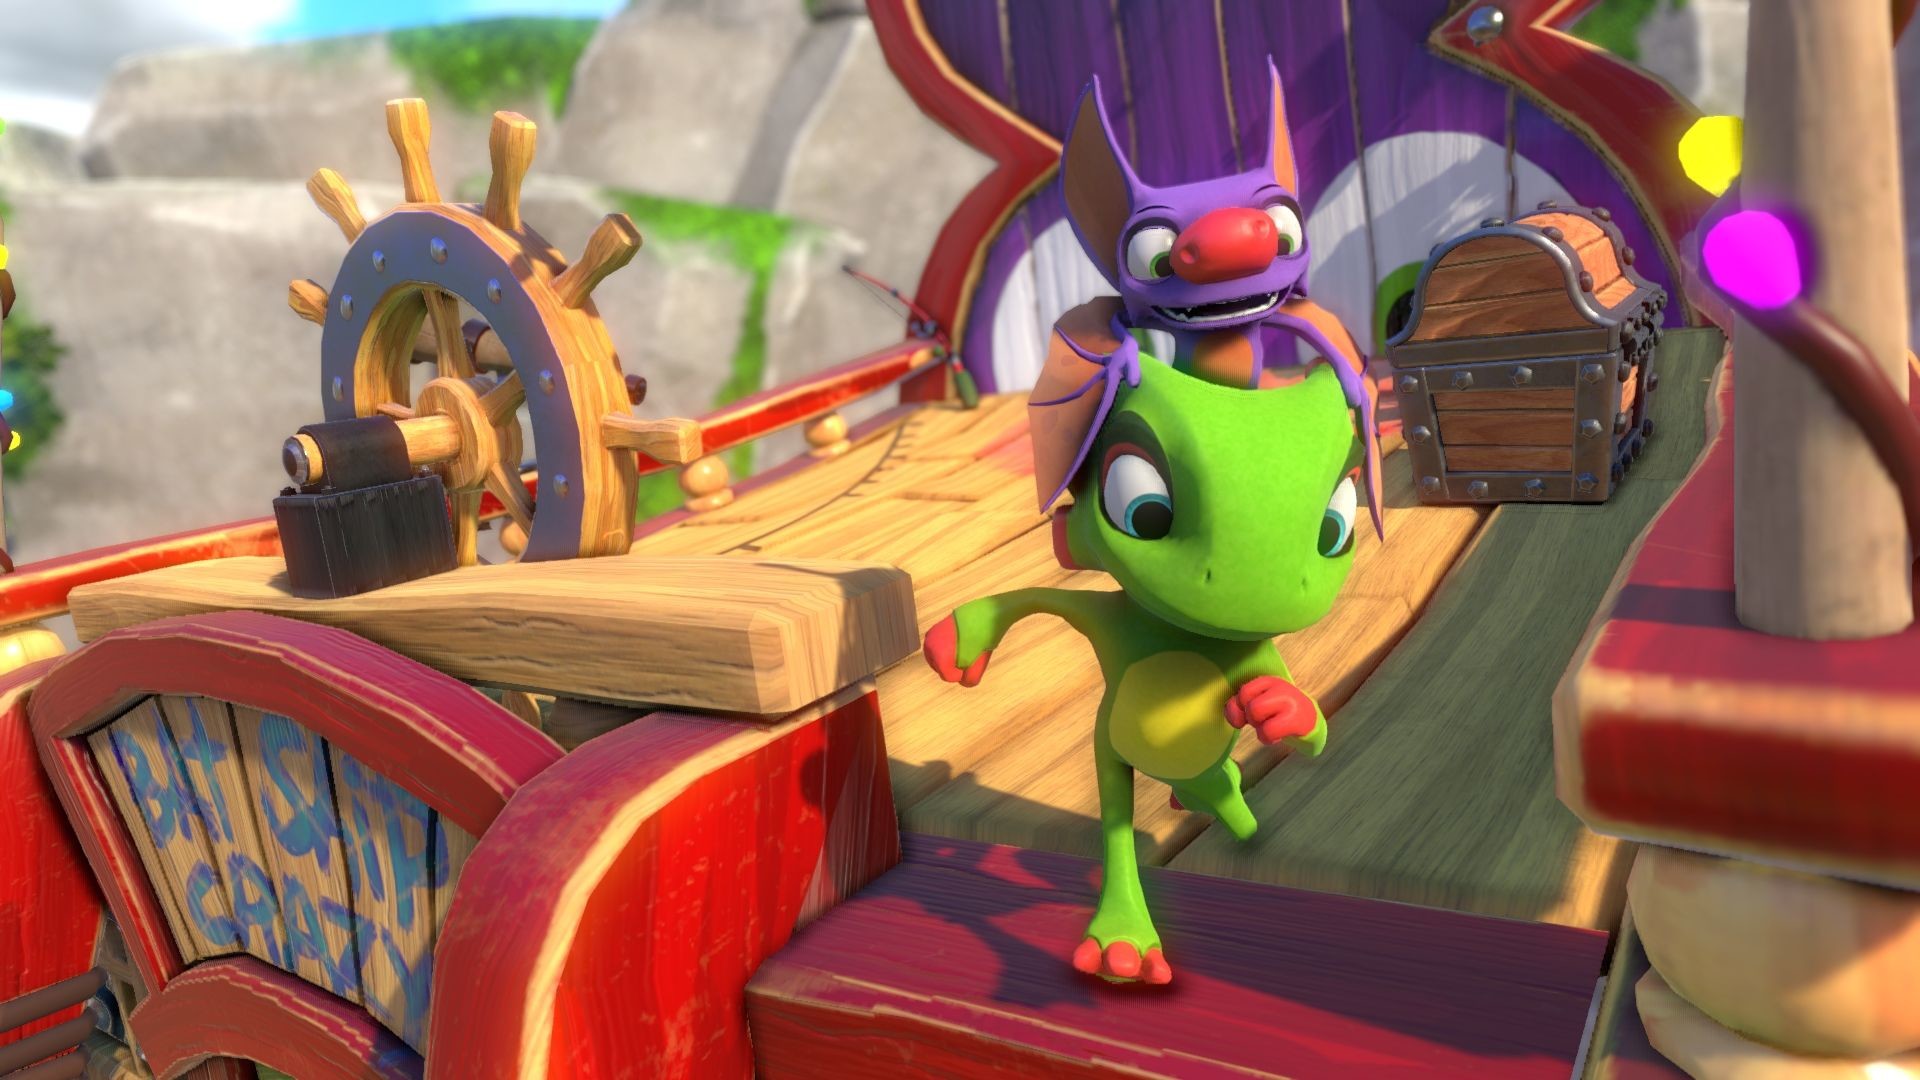 1920x1080 Game review: Yooka-Laylee is the unofficial return of Banjo-Kazooie